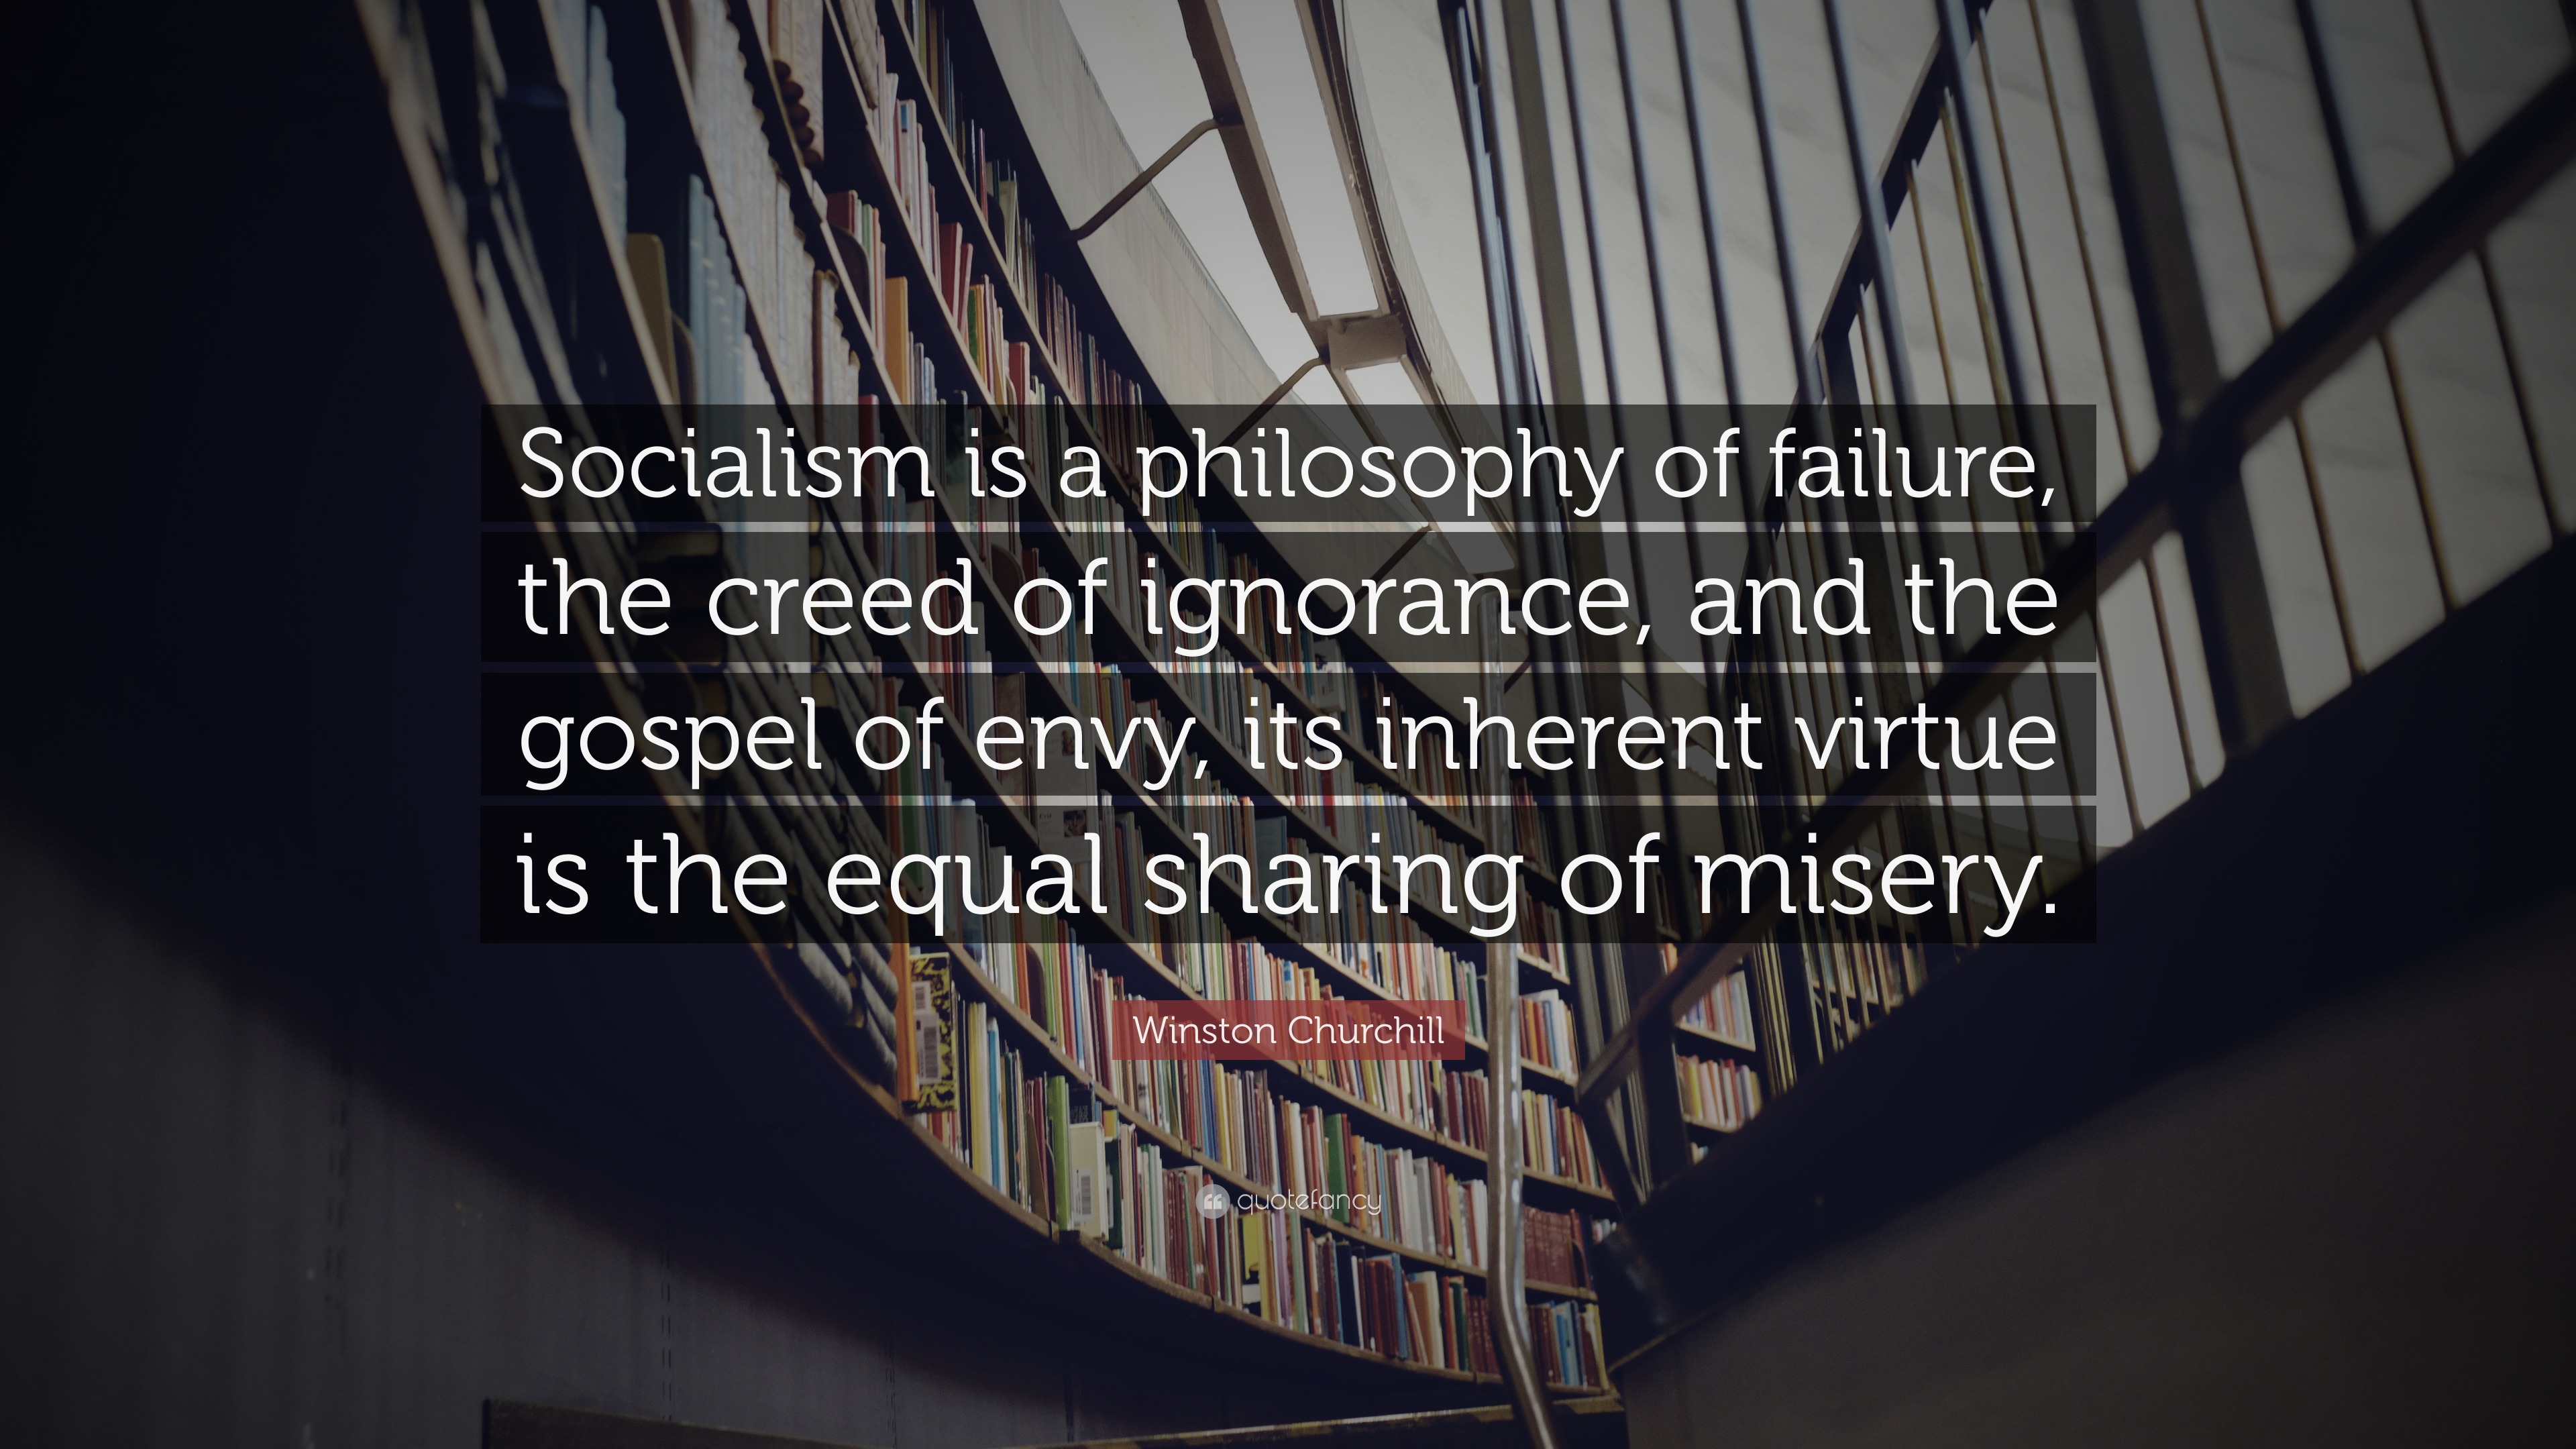 Winston Churchill Quote: “Socialism Is A Philosophy Of Failure, The Creed Of Ignorance, And The Gospel Of Envy, Its Inherent Virtue Is The Equal S...”